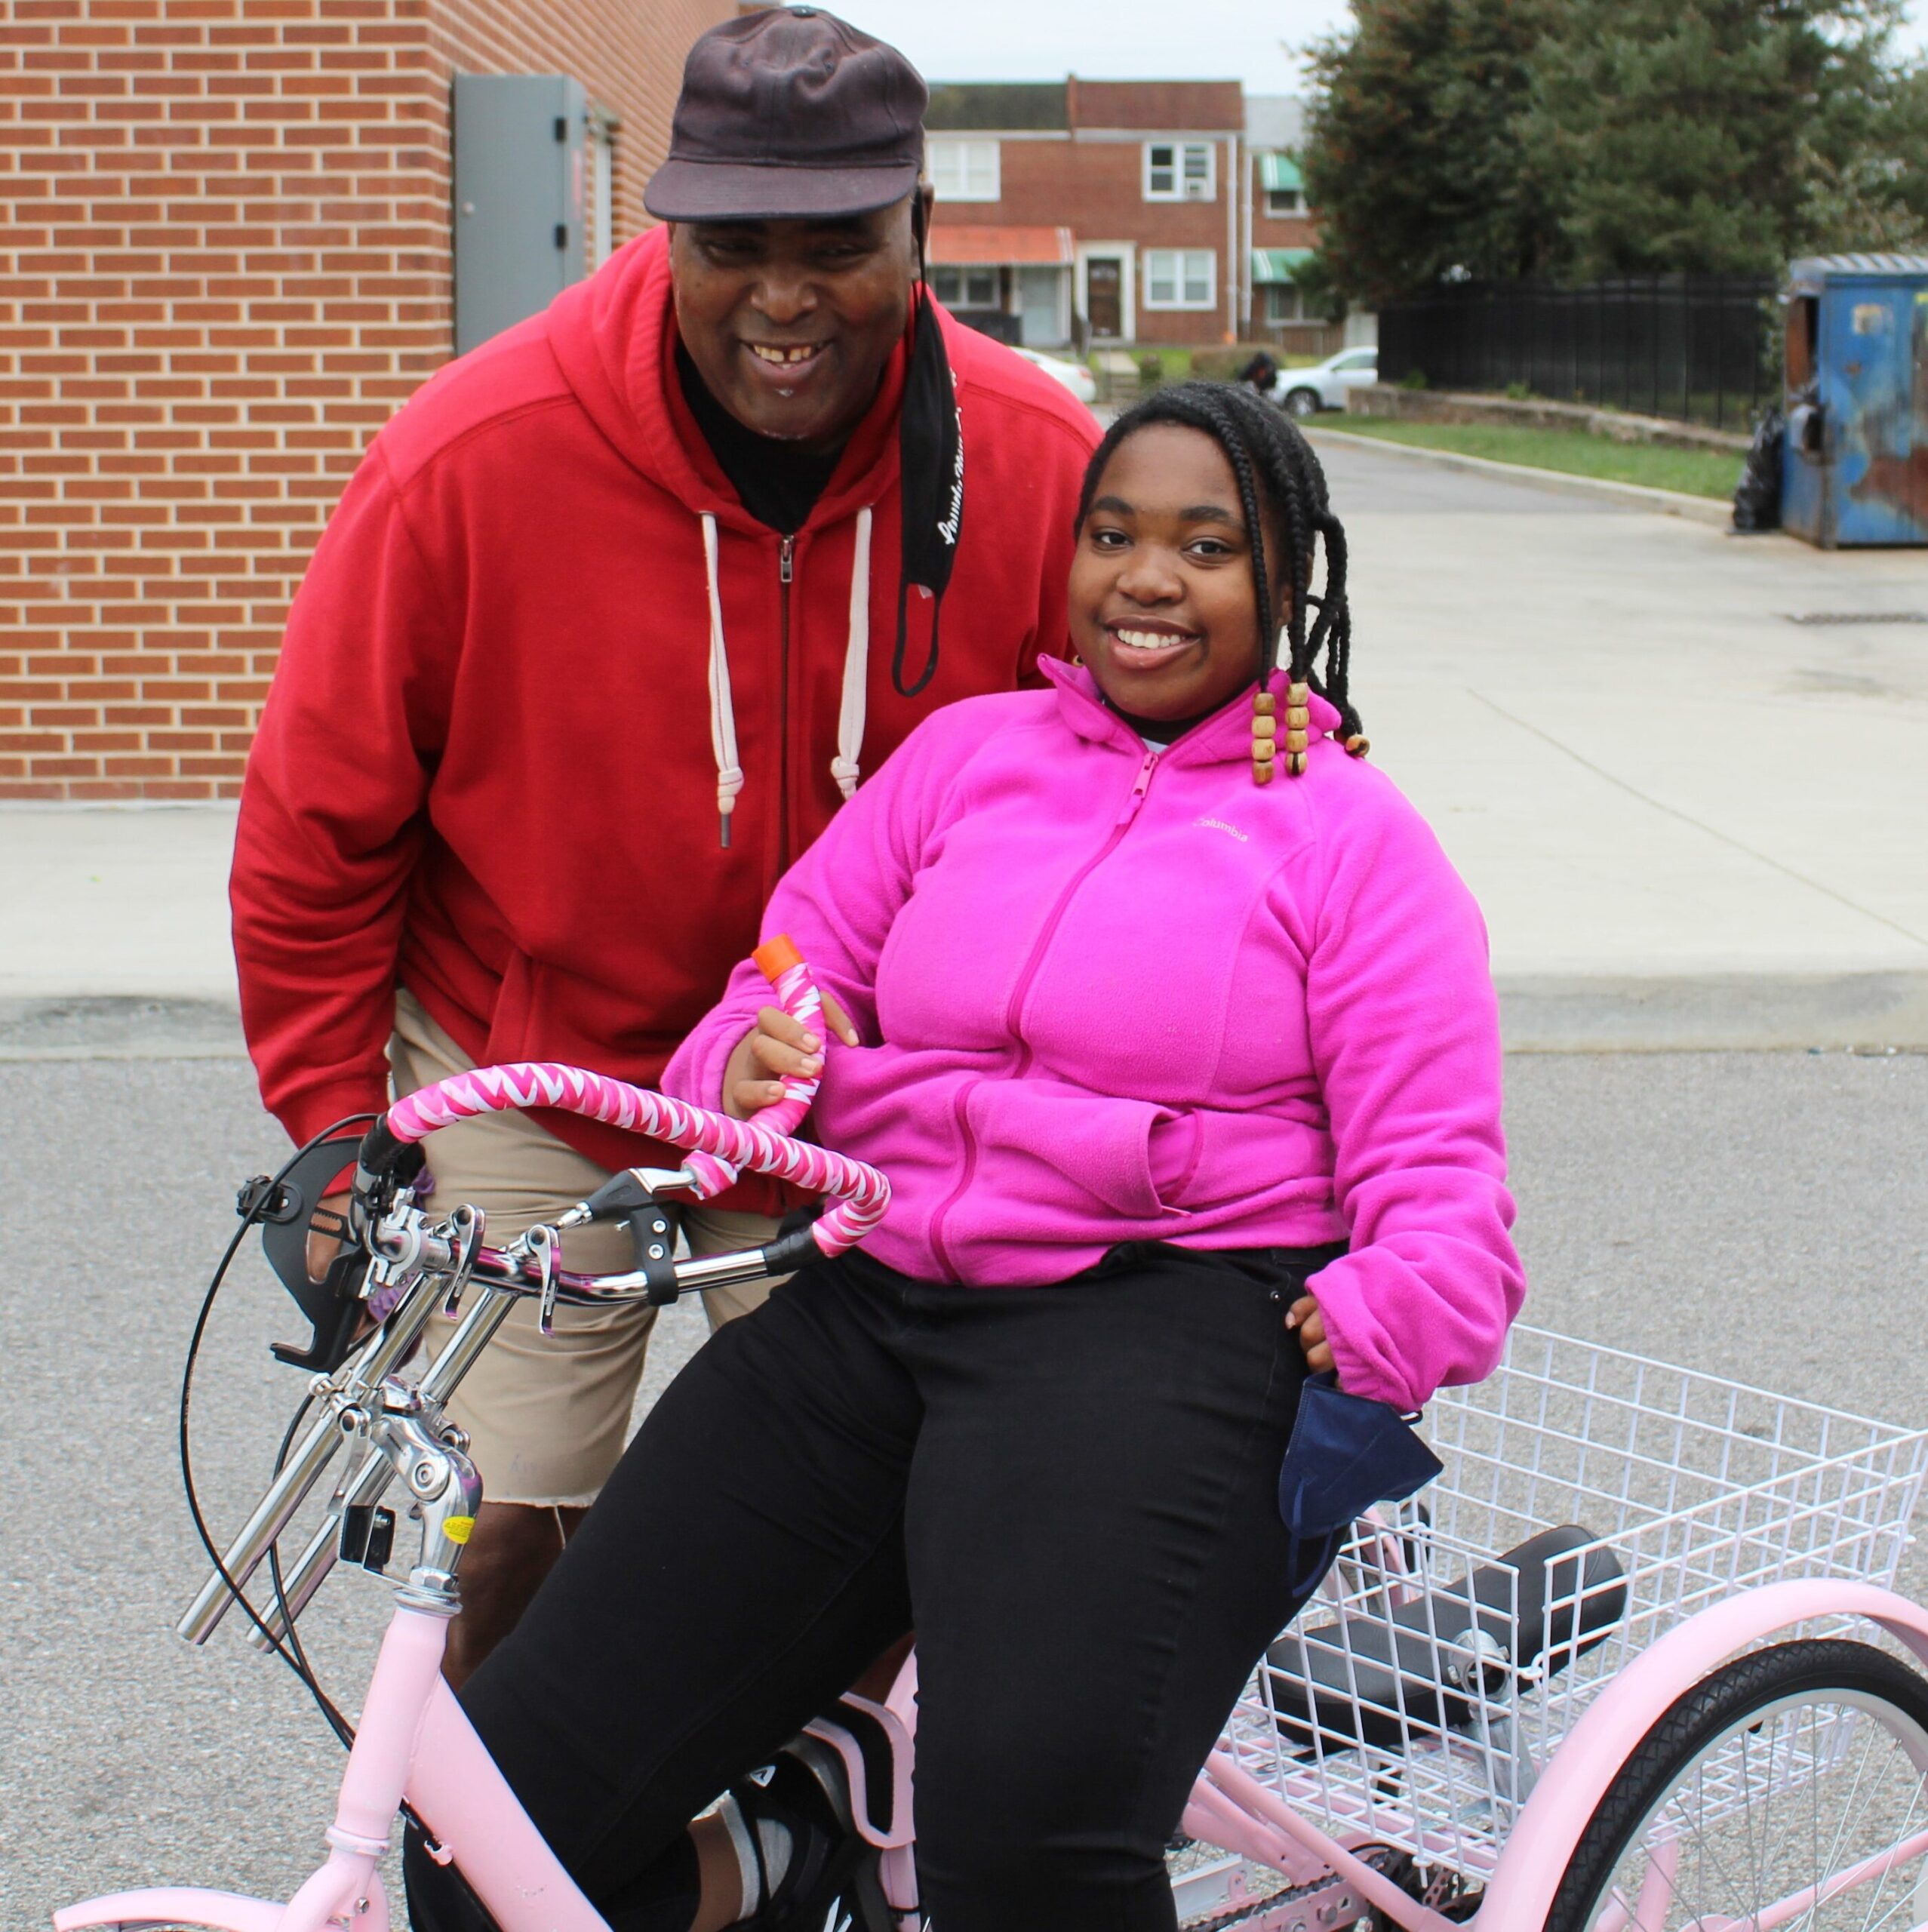 Teen on her new pink trike with customized features with dad by her side.